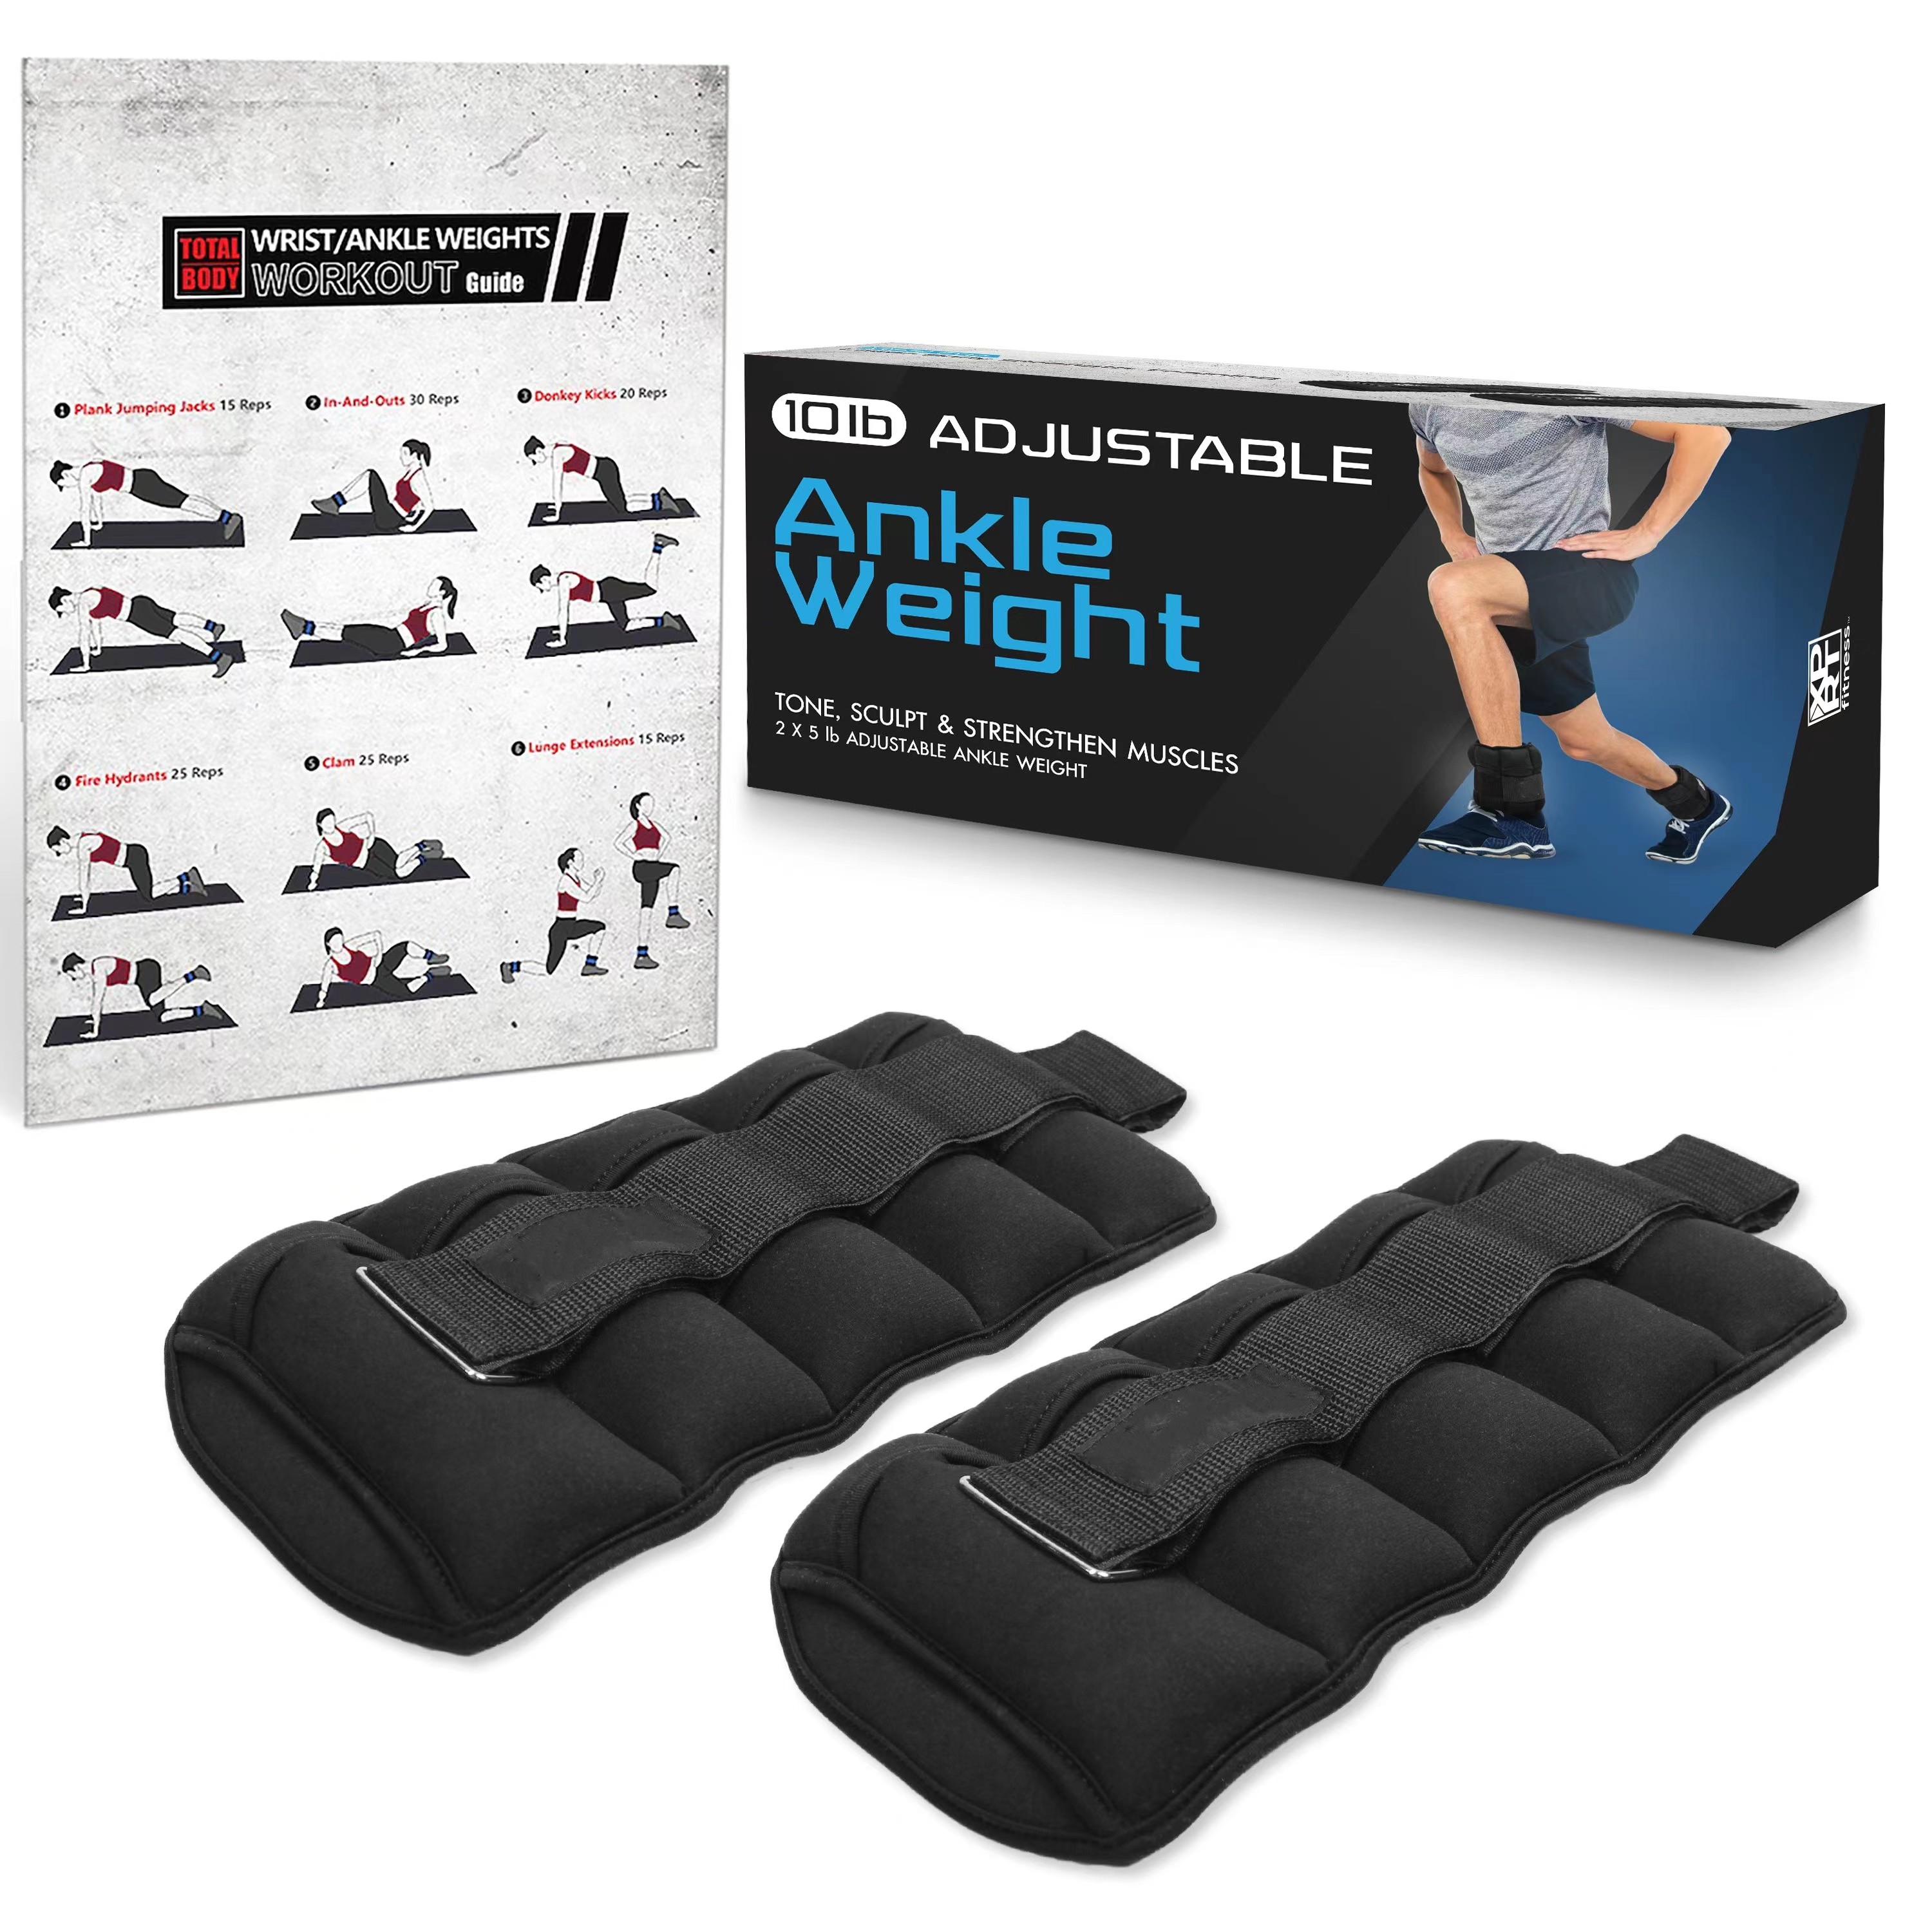 10 lbs Adjustable Ankle Weights for Women and Men, 1-5lbs removable weights each, set of 2 